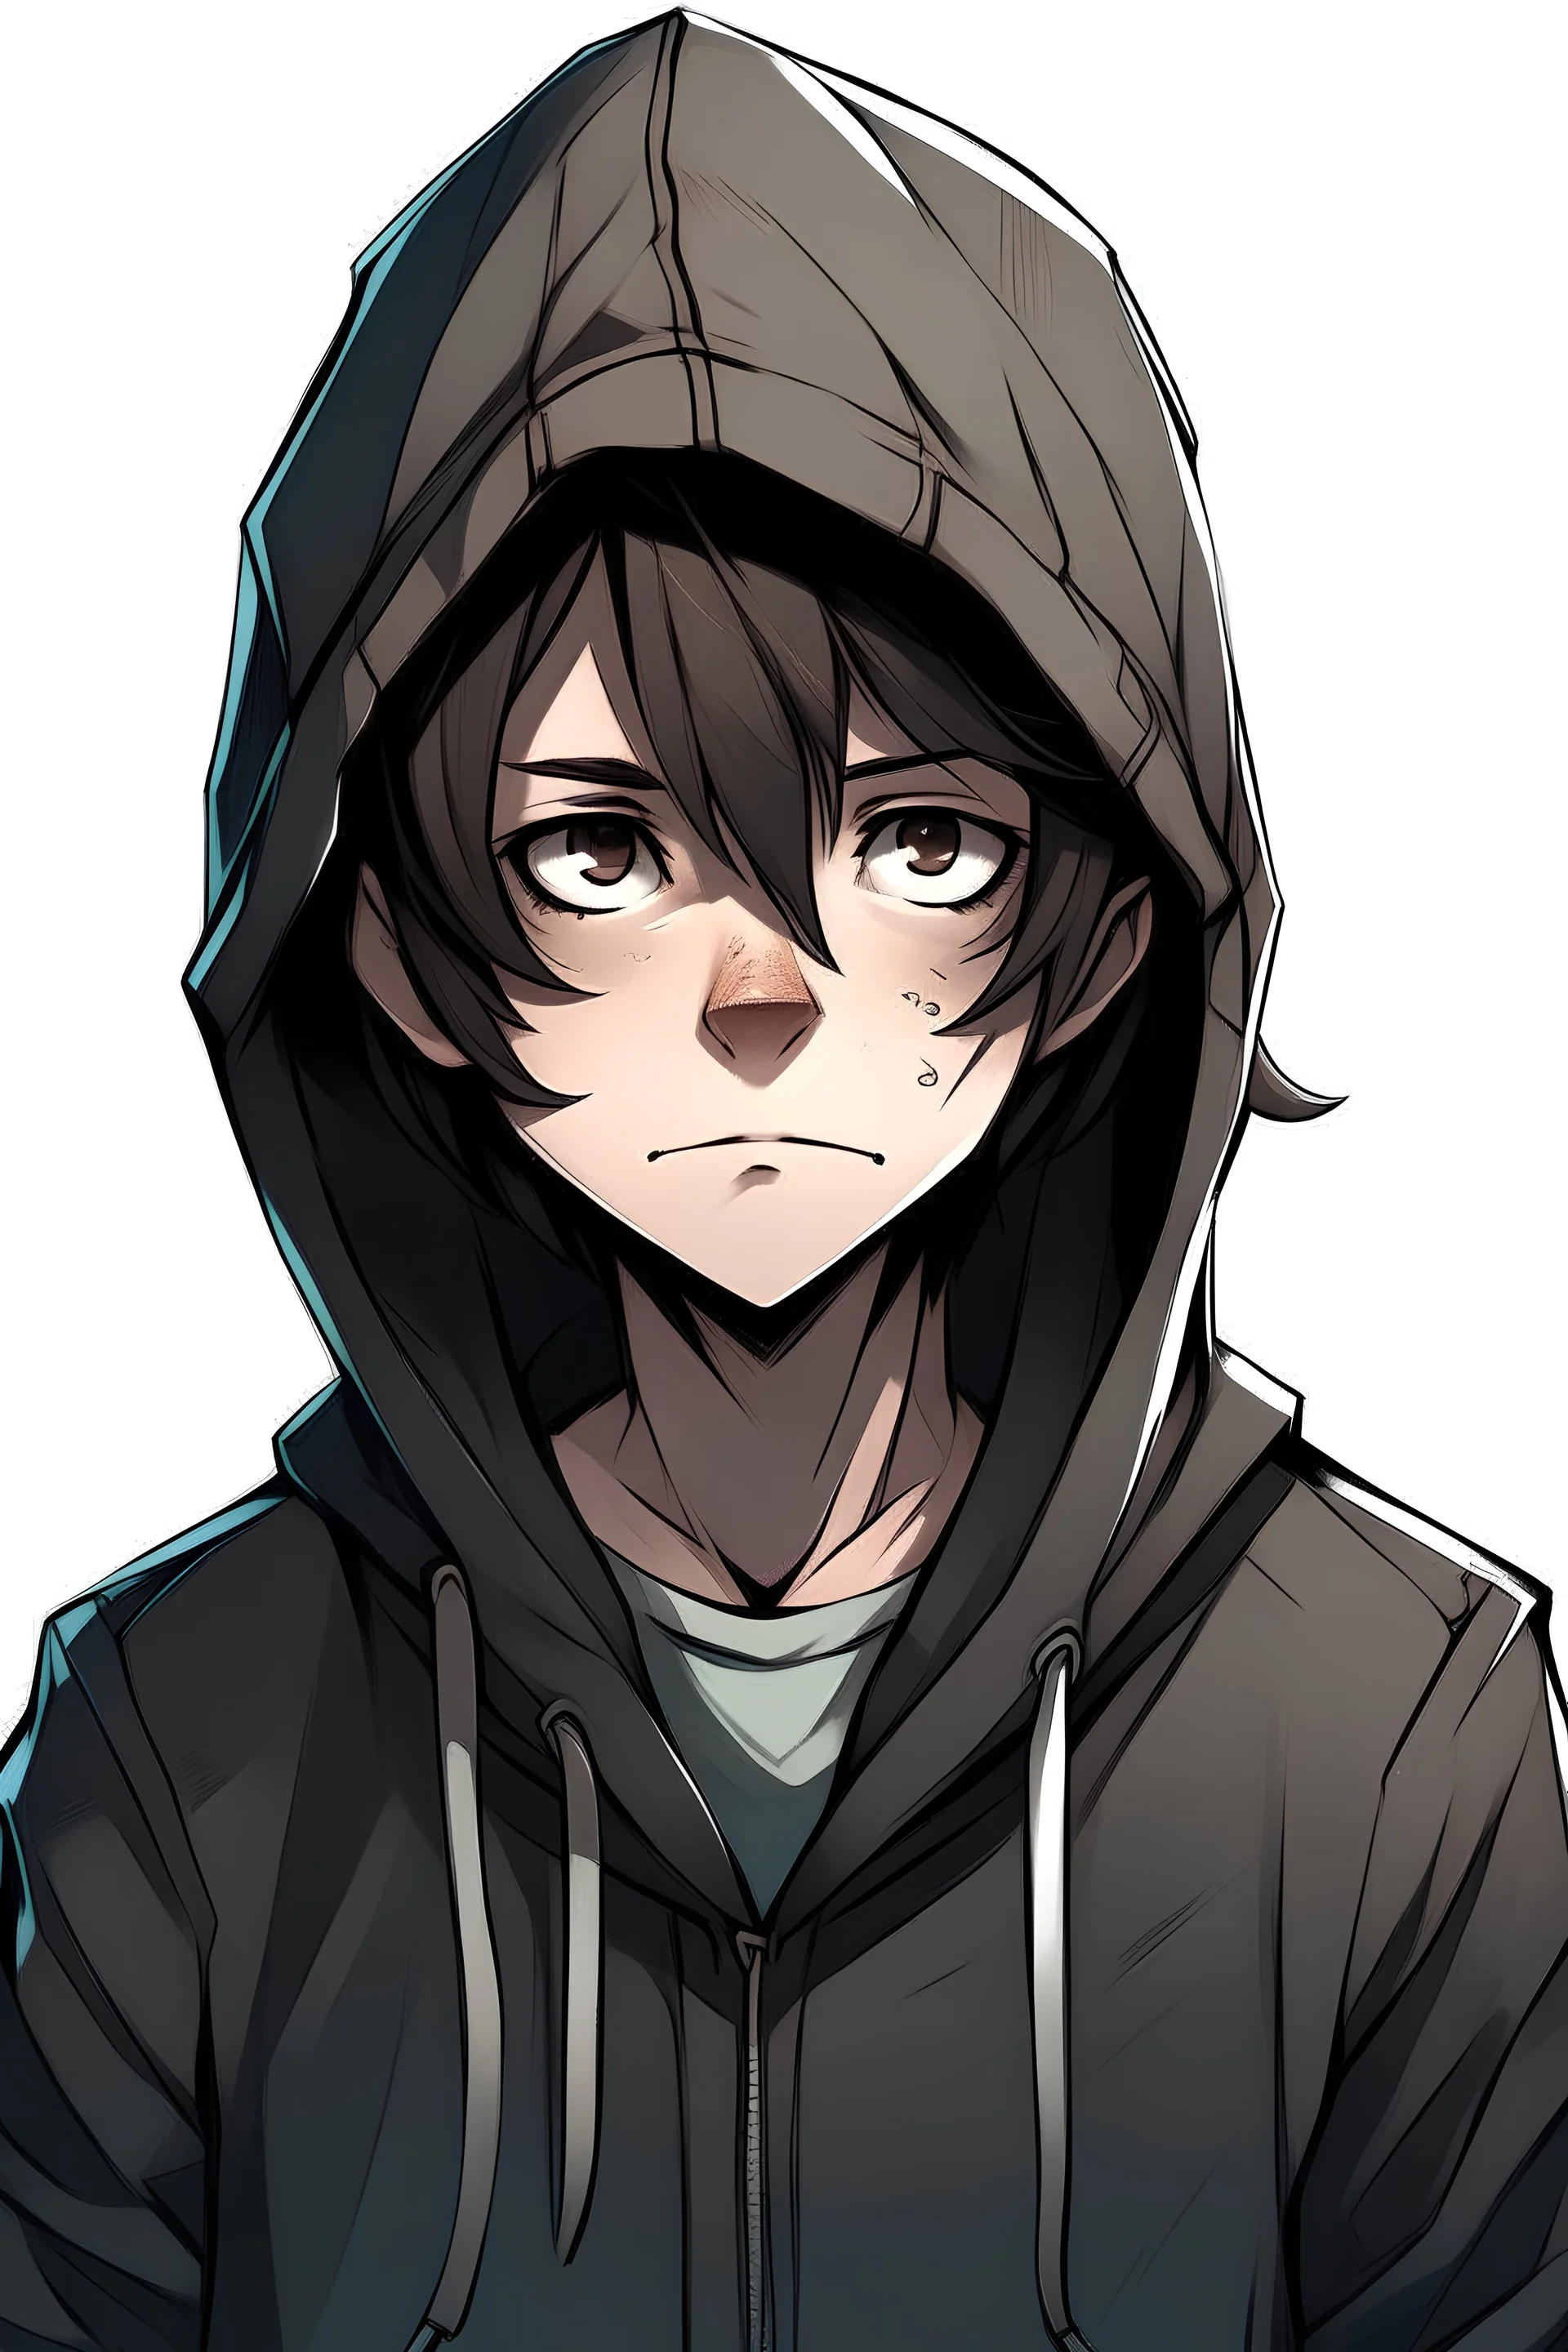 a boy named sebastian that has a hoodie and he has flt hair and a diomend face